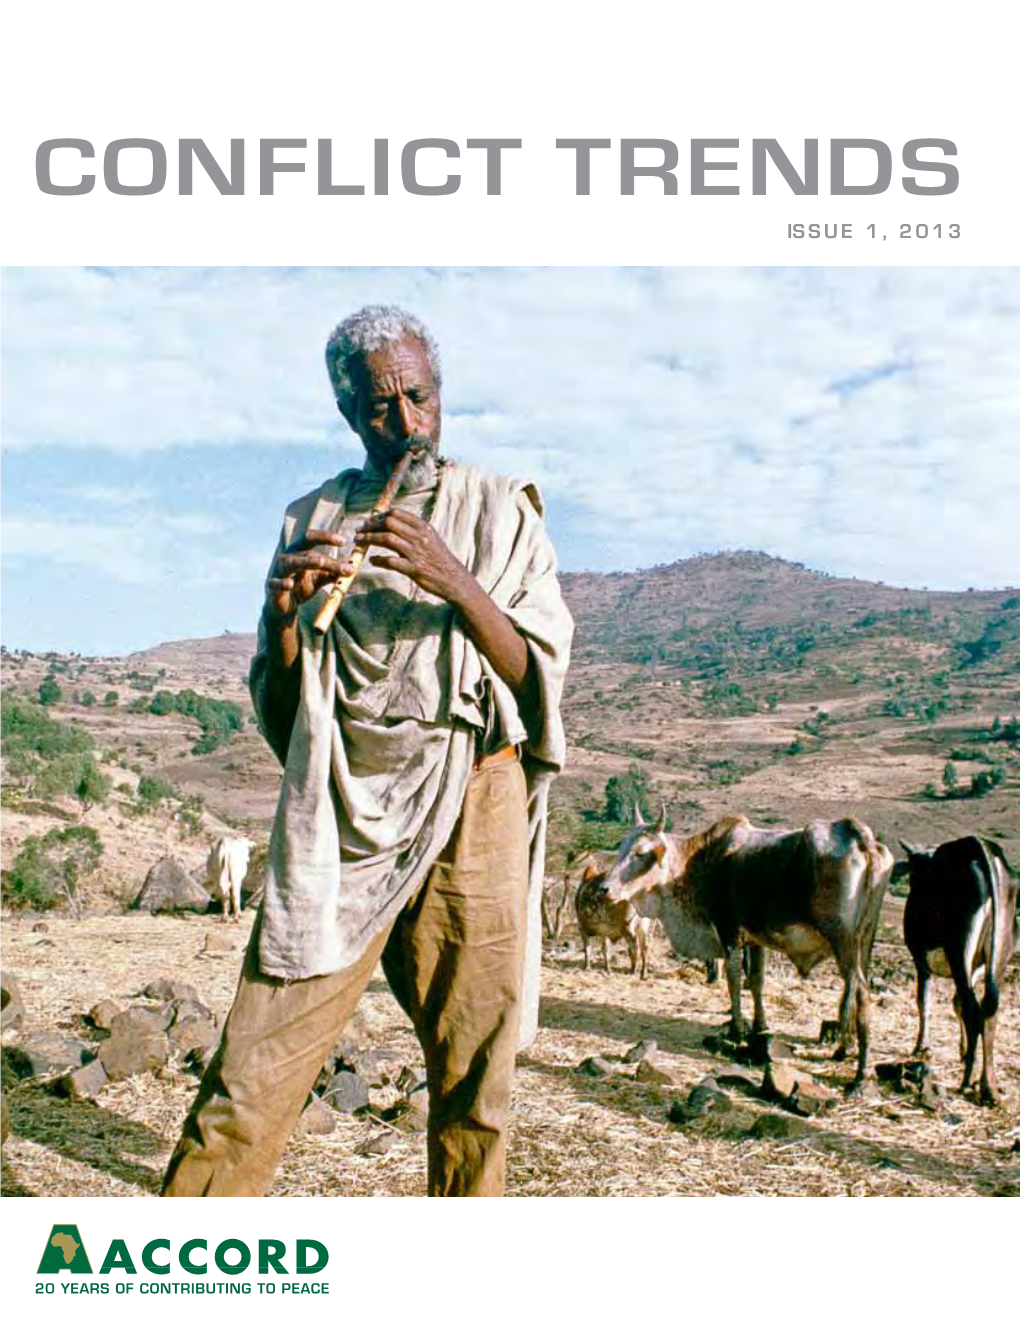 Conflict Trends, Issue 1